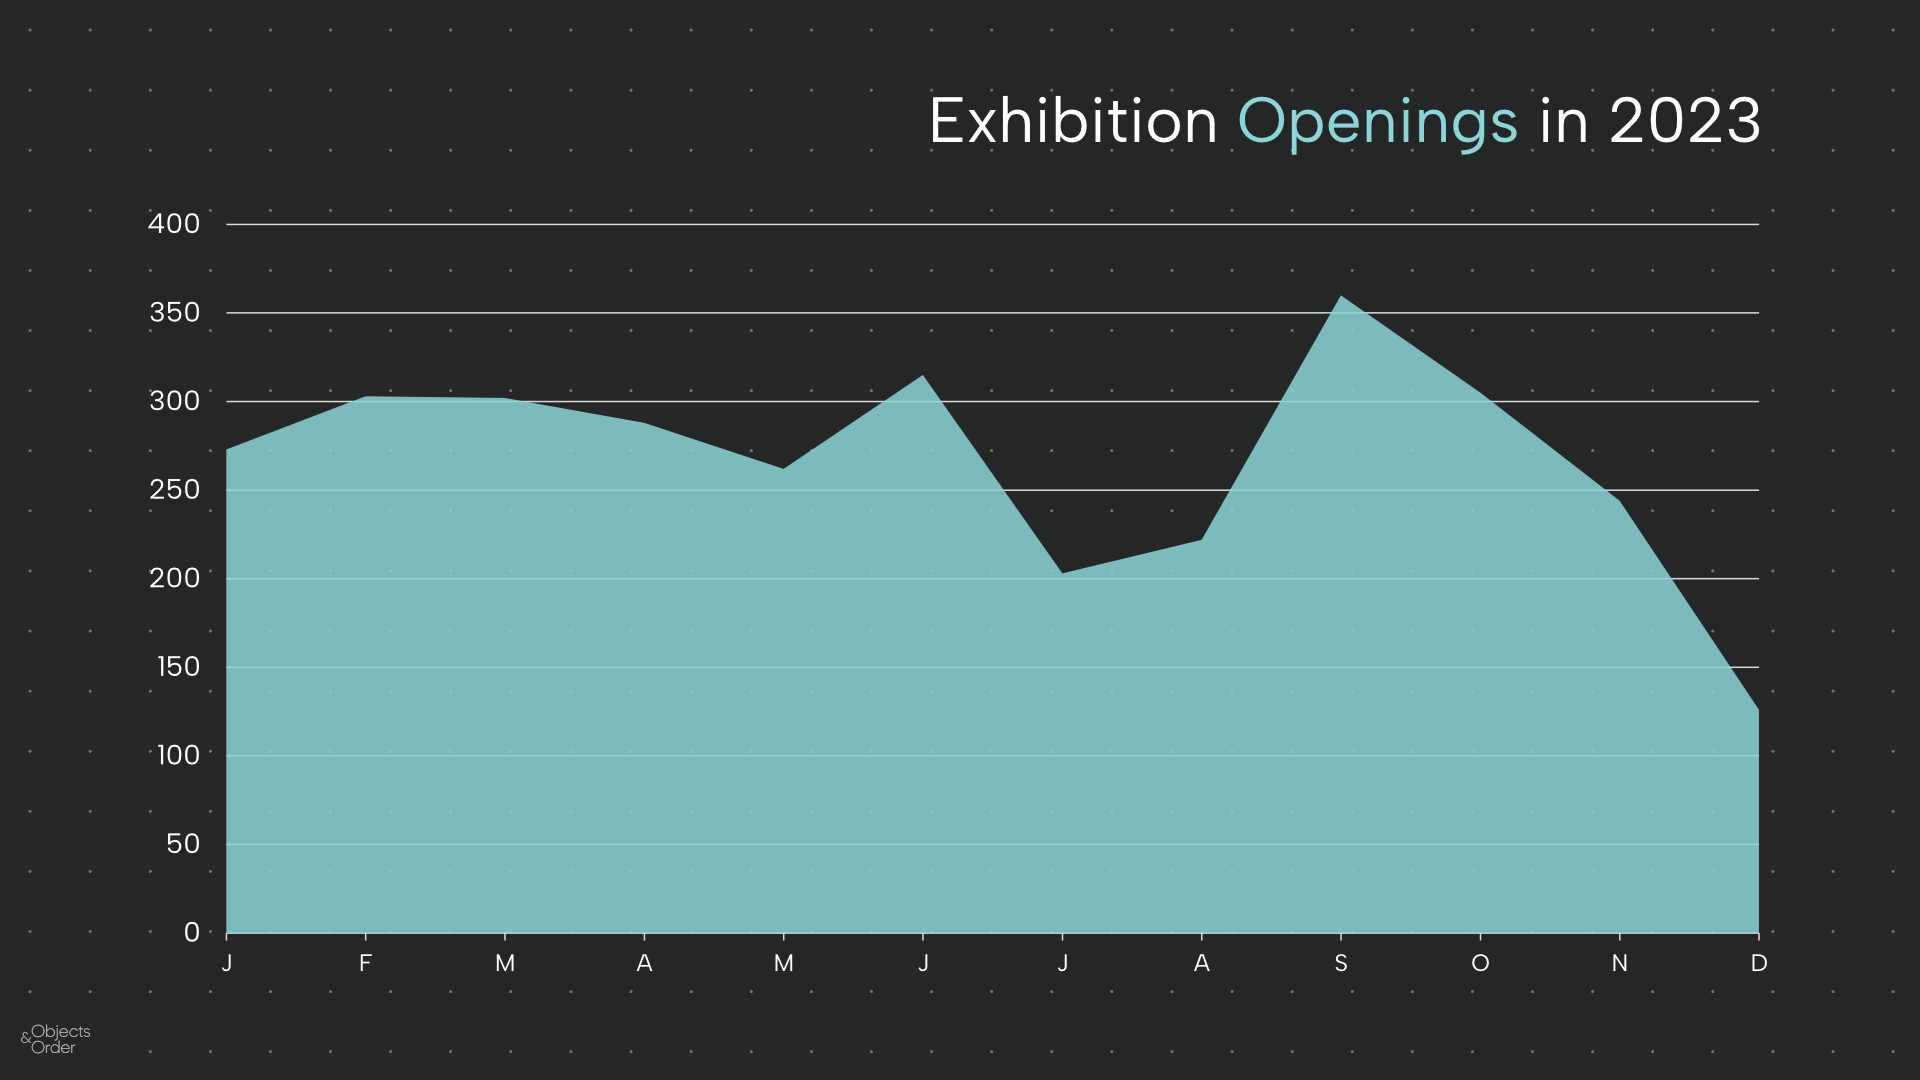 Exhibition Openings in 2023